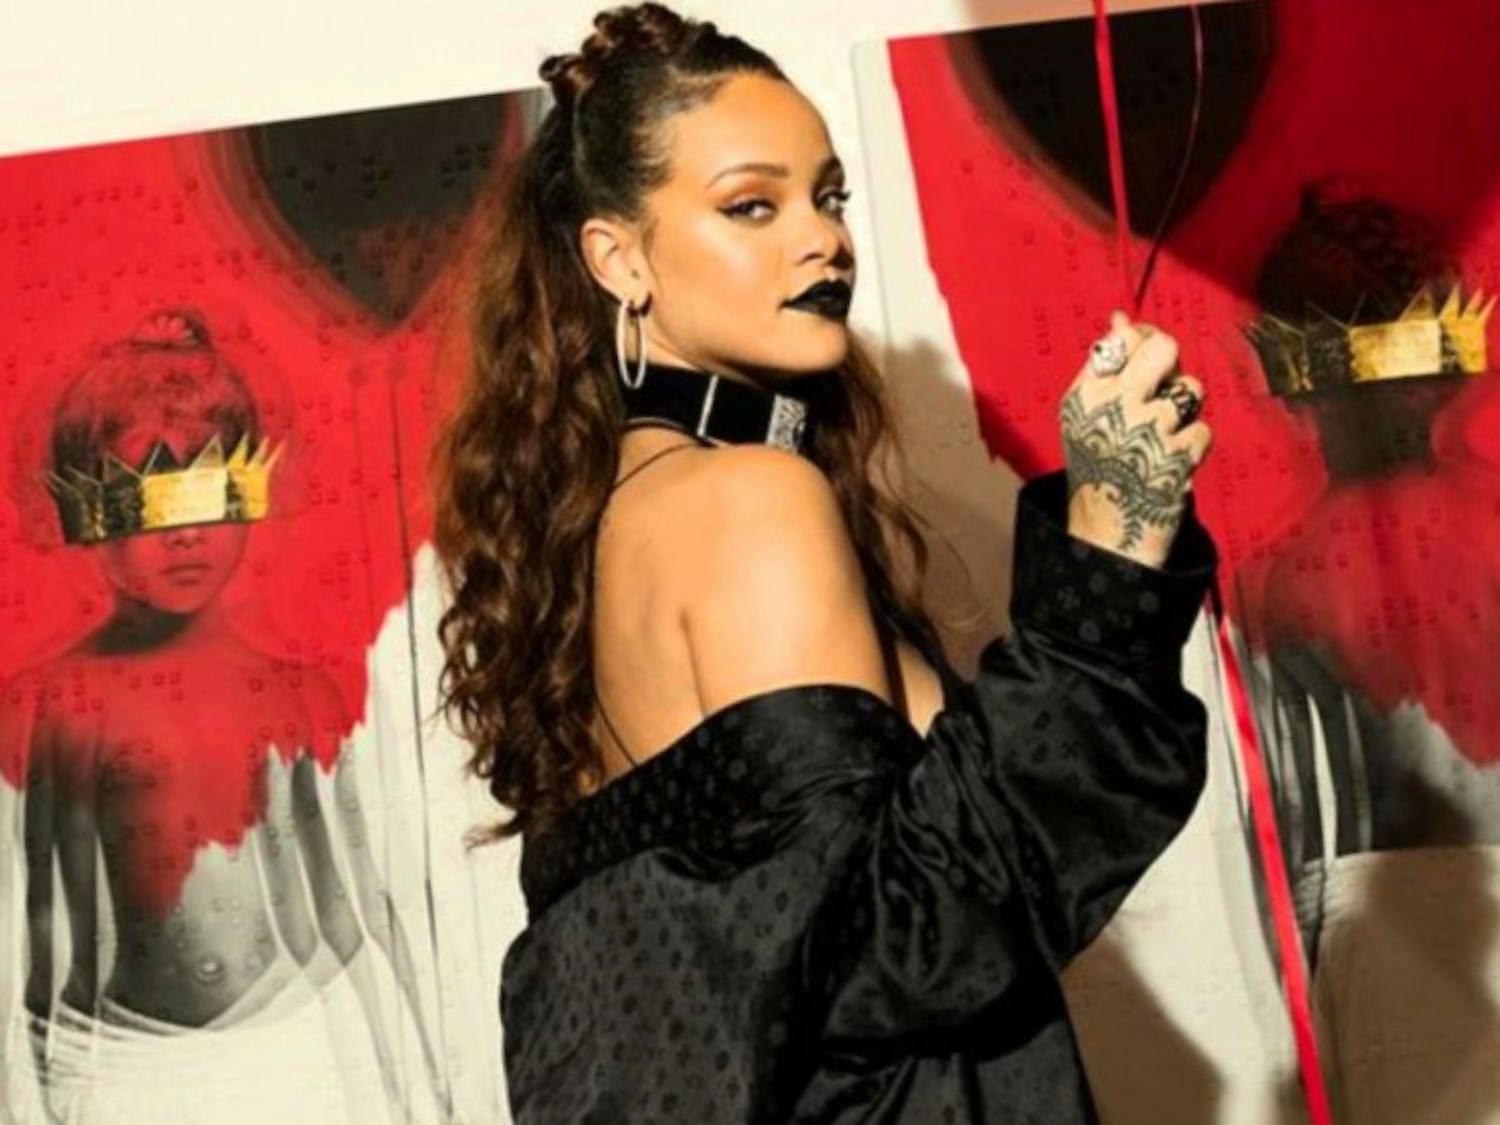 Rihanna works to create timeless music in recent album ANTI.